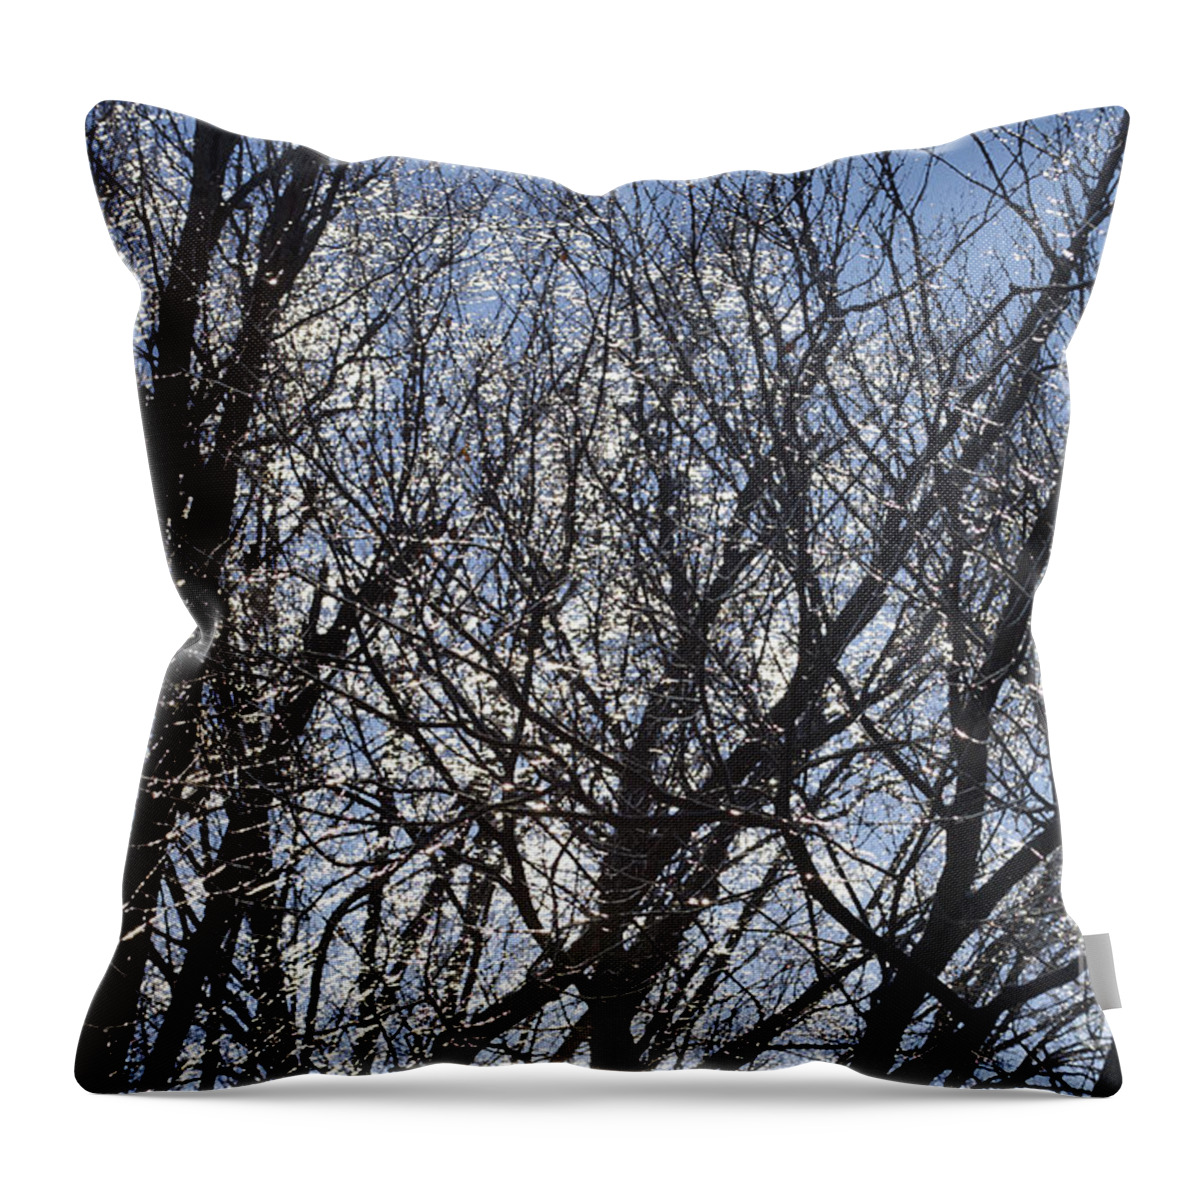 Icy Trees Throw Pillow featuring the photograph Icy Trees by Luther Fine Art